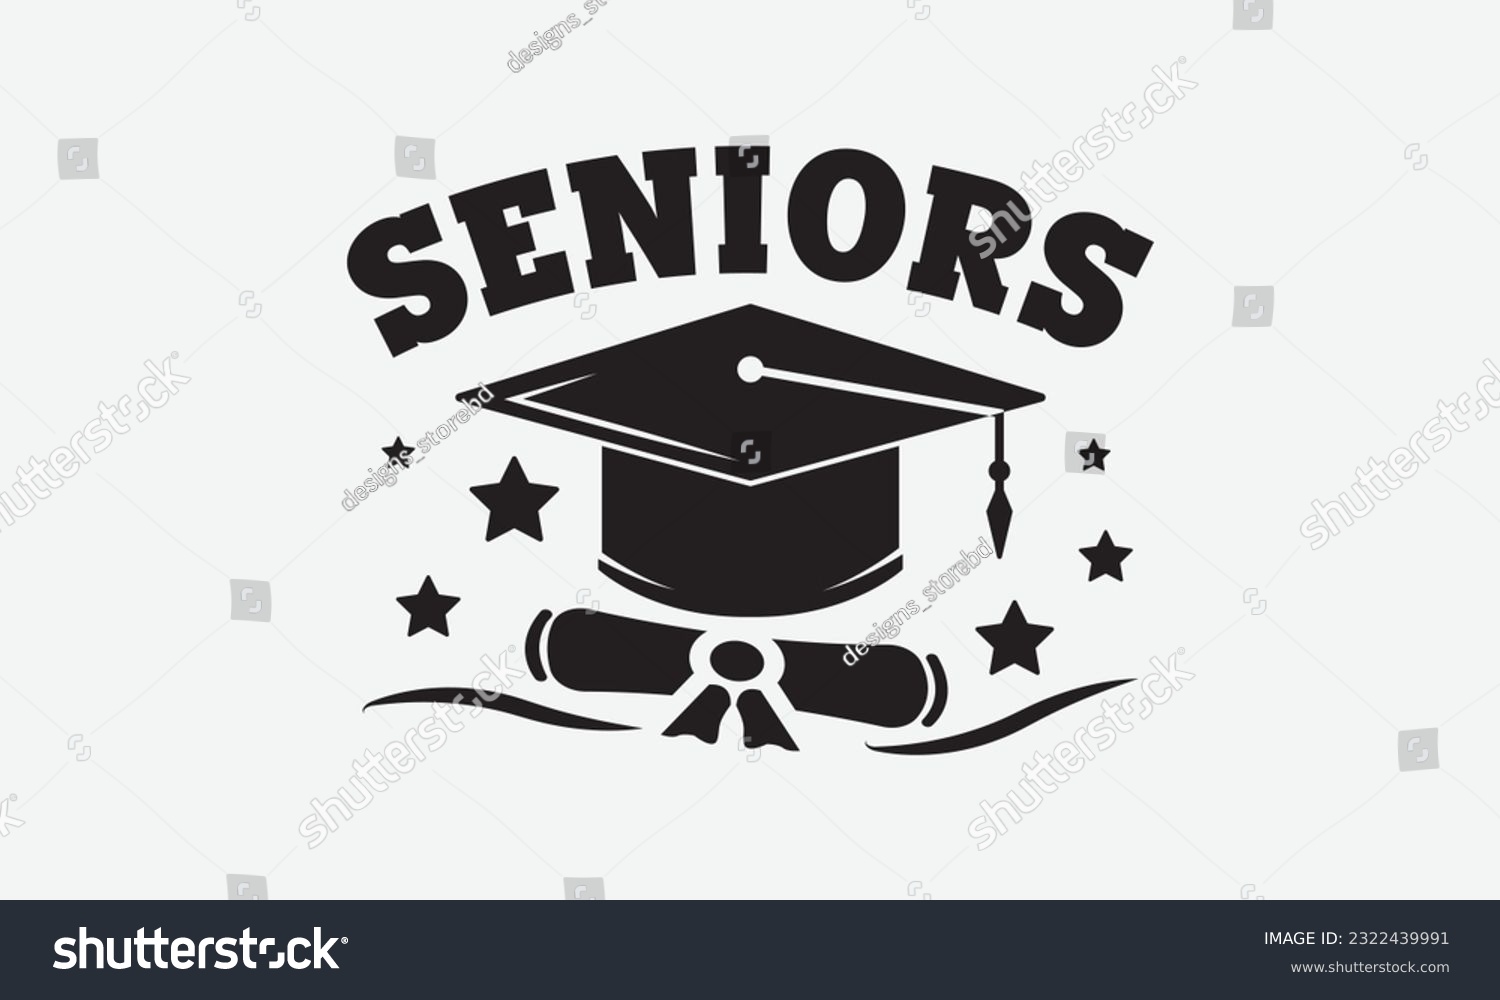 SVG of Seniors svg, Graduation SVG , Class of 2023 Graduation SVG Bundle, Graduation cap svg, T shirt Calligraphy phrase for Christmas, Hand drawn lettering for Xmas greetings cards, invitations, Good for  svg